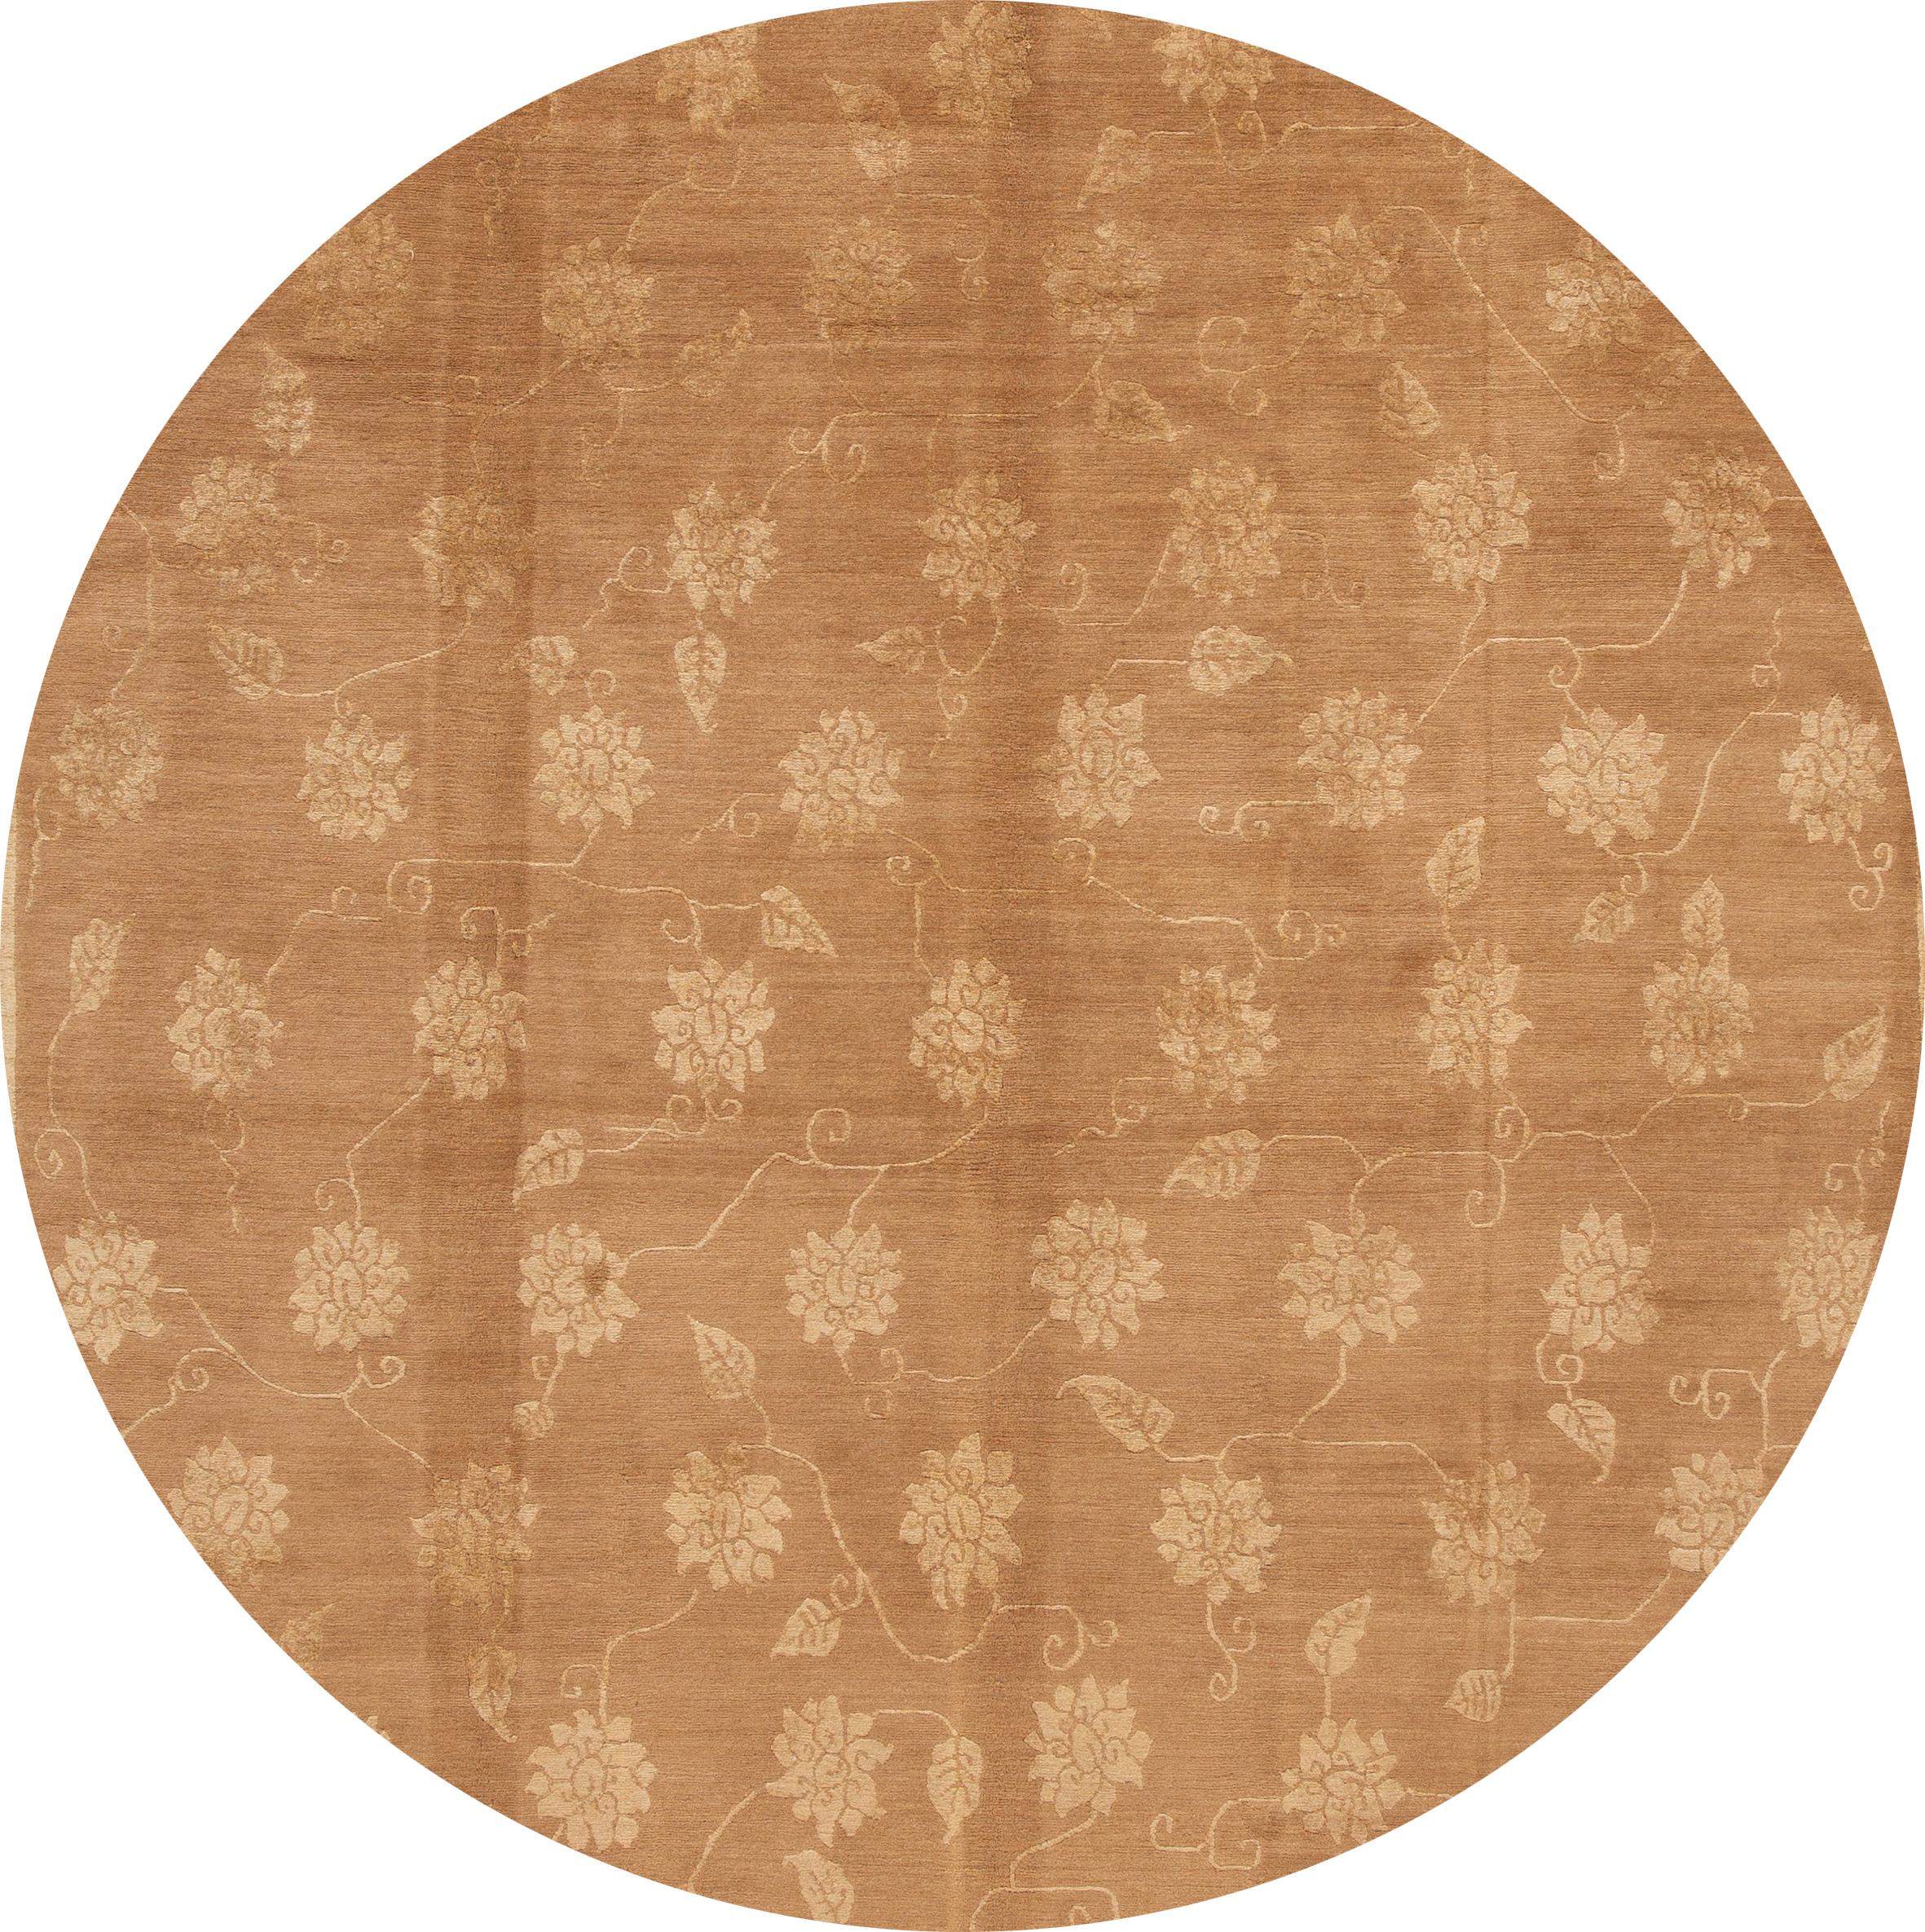 A beautiful hand knotted Tibetan rug with a floral design on a light brown back ground.

This rug measures: 8' x 10'.